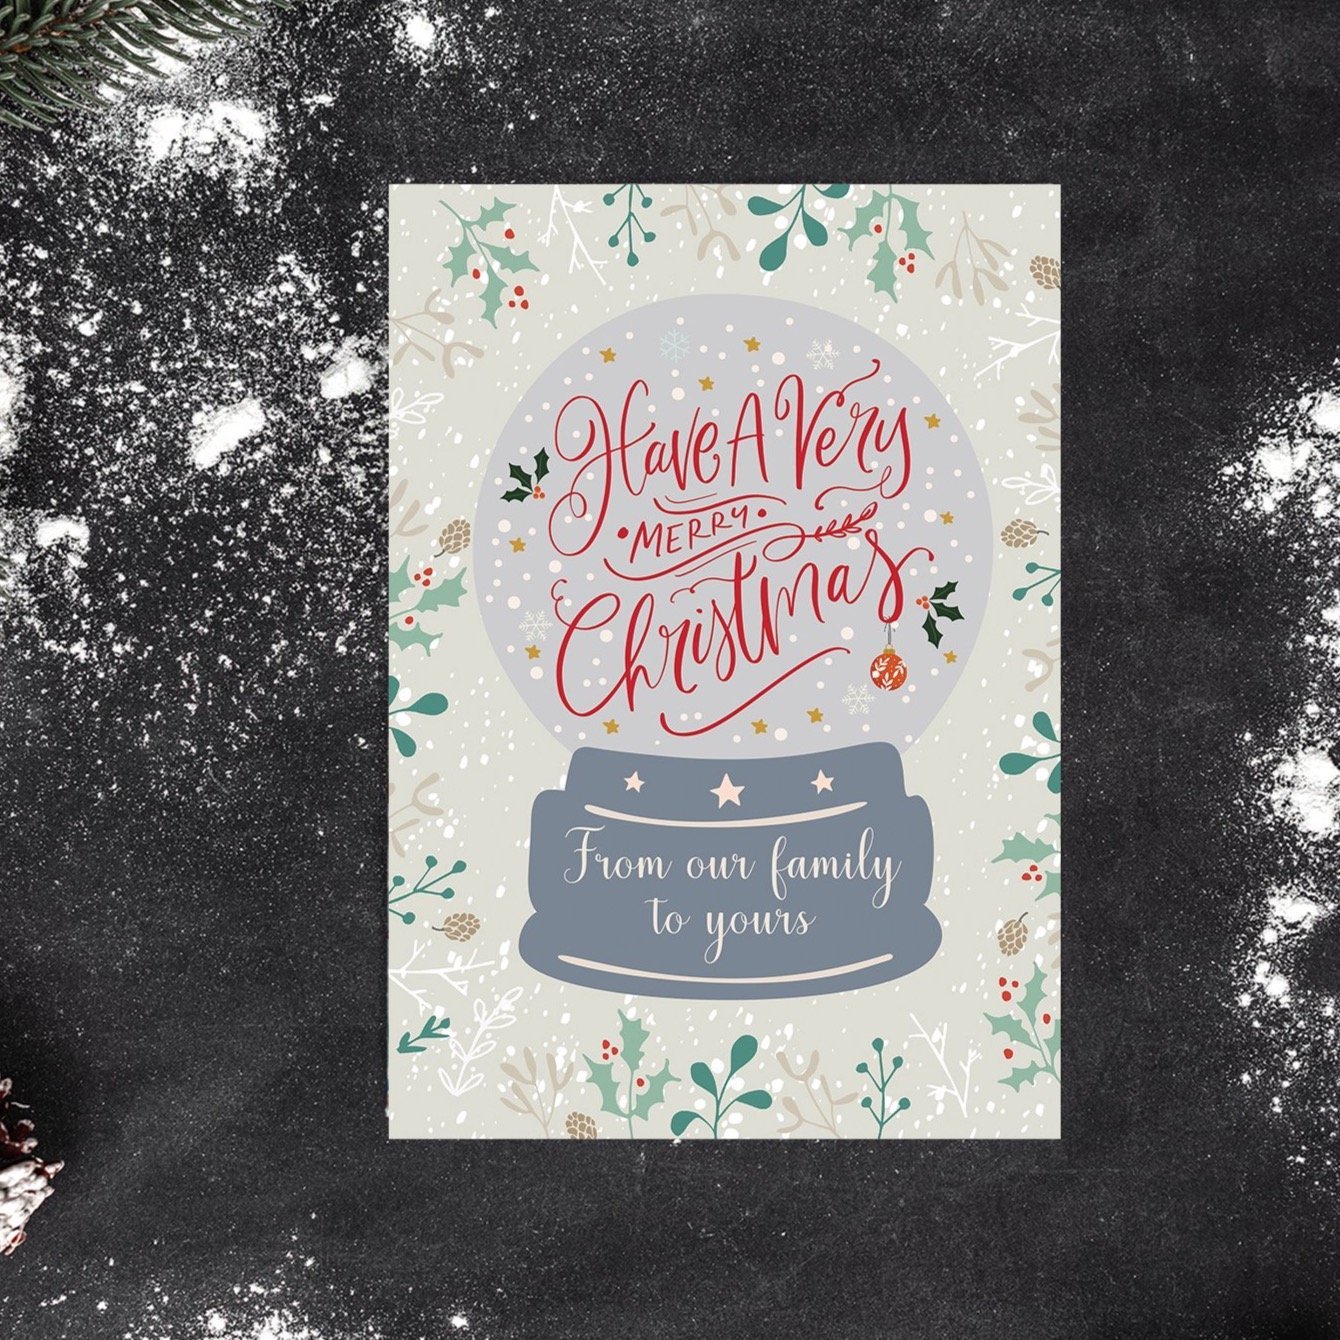 From our family to yours Christmas Card | Natalie Ryan Design